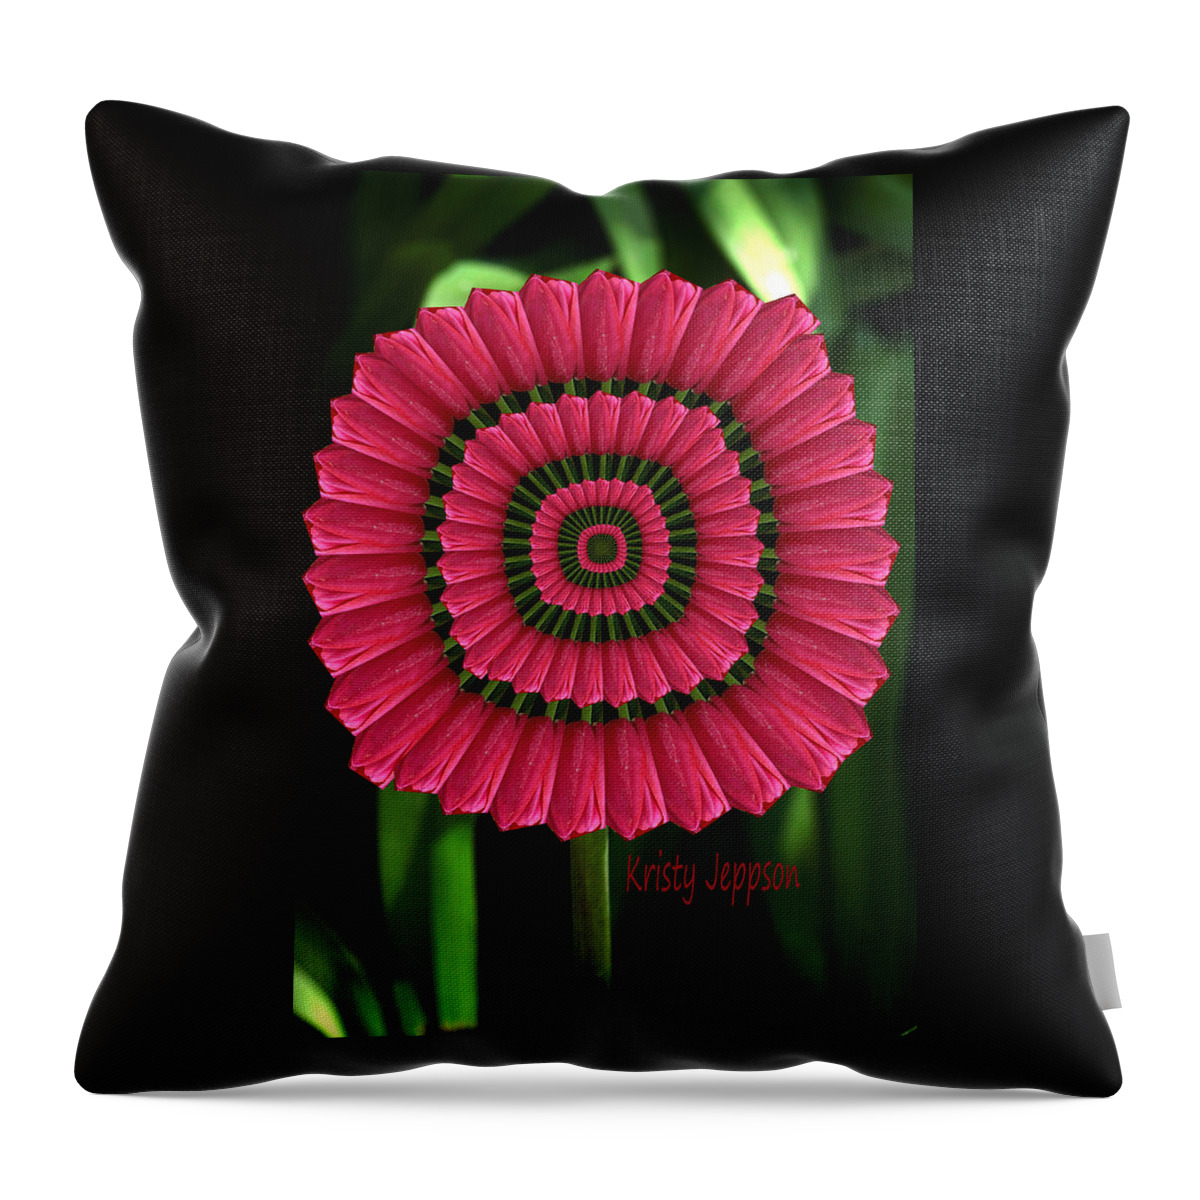 Tulip Throw Pillow featuring the photograph Tulip K1 by Kristy Jeppson